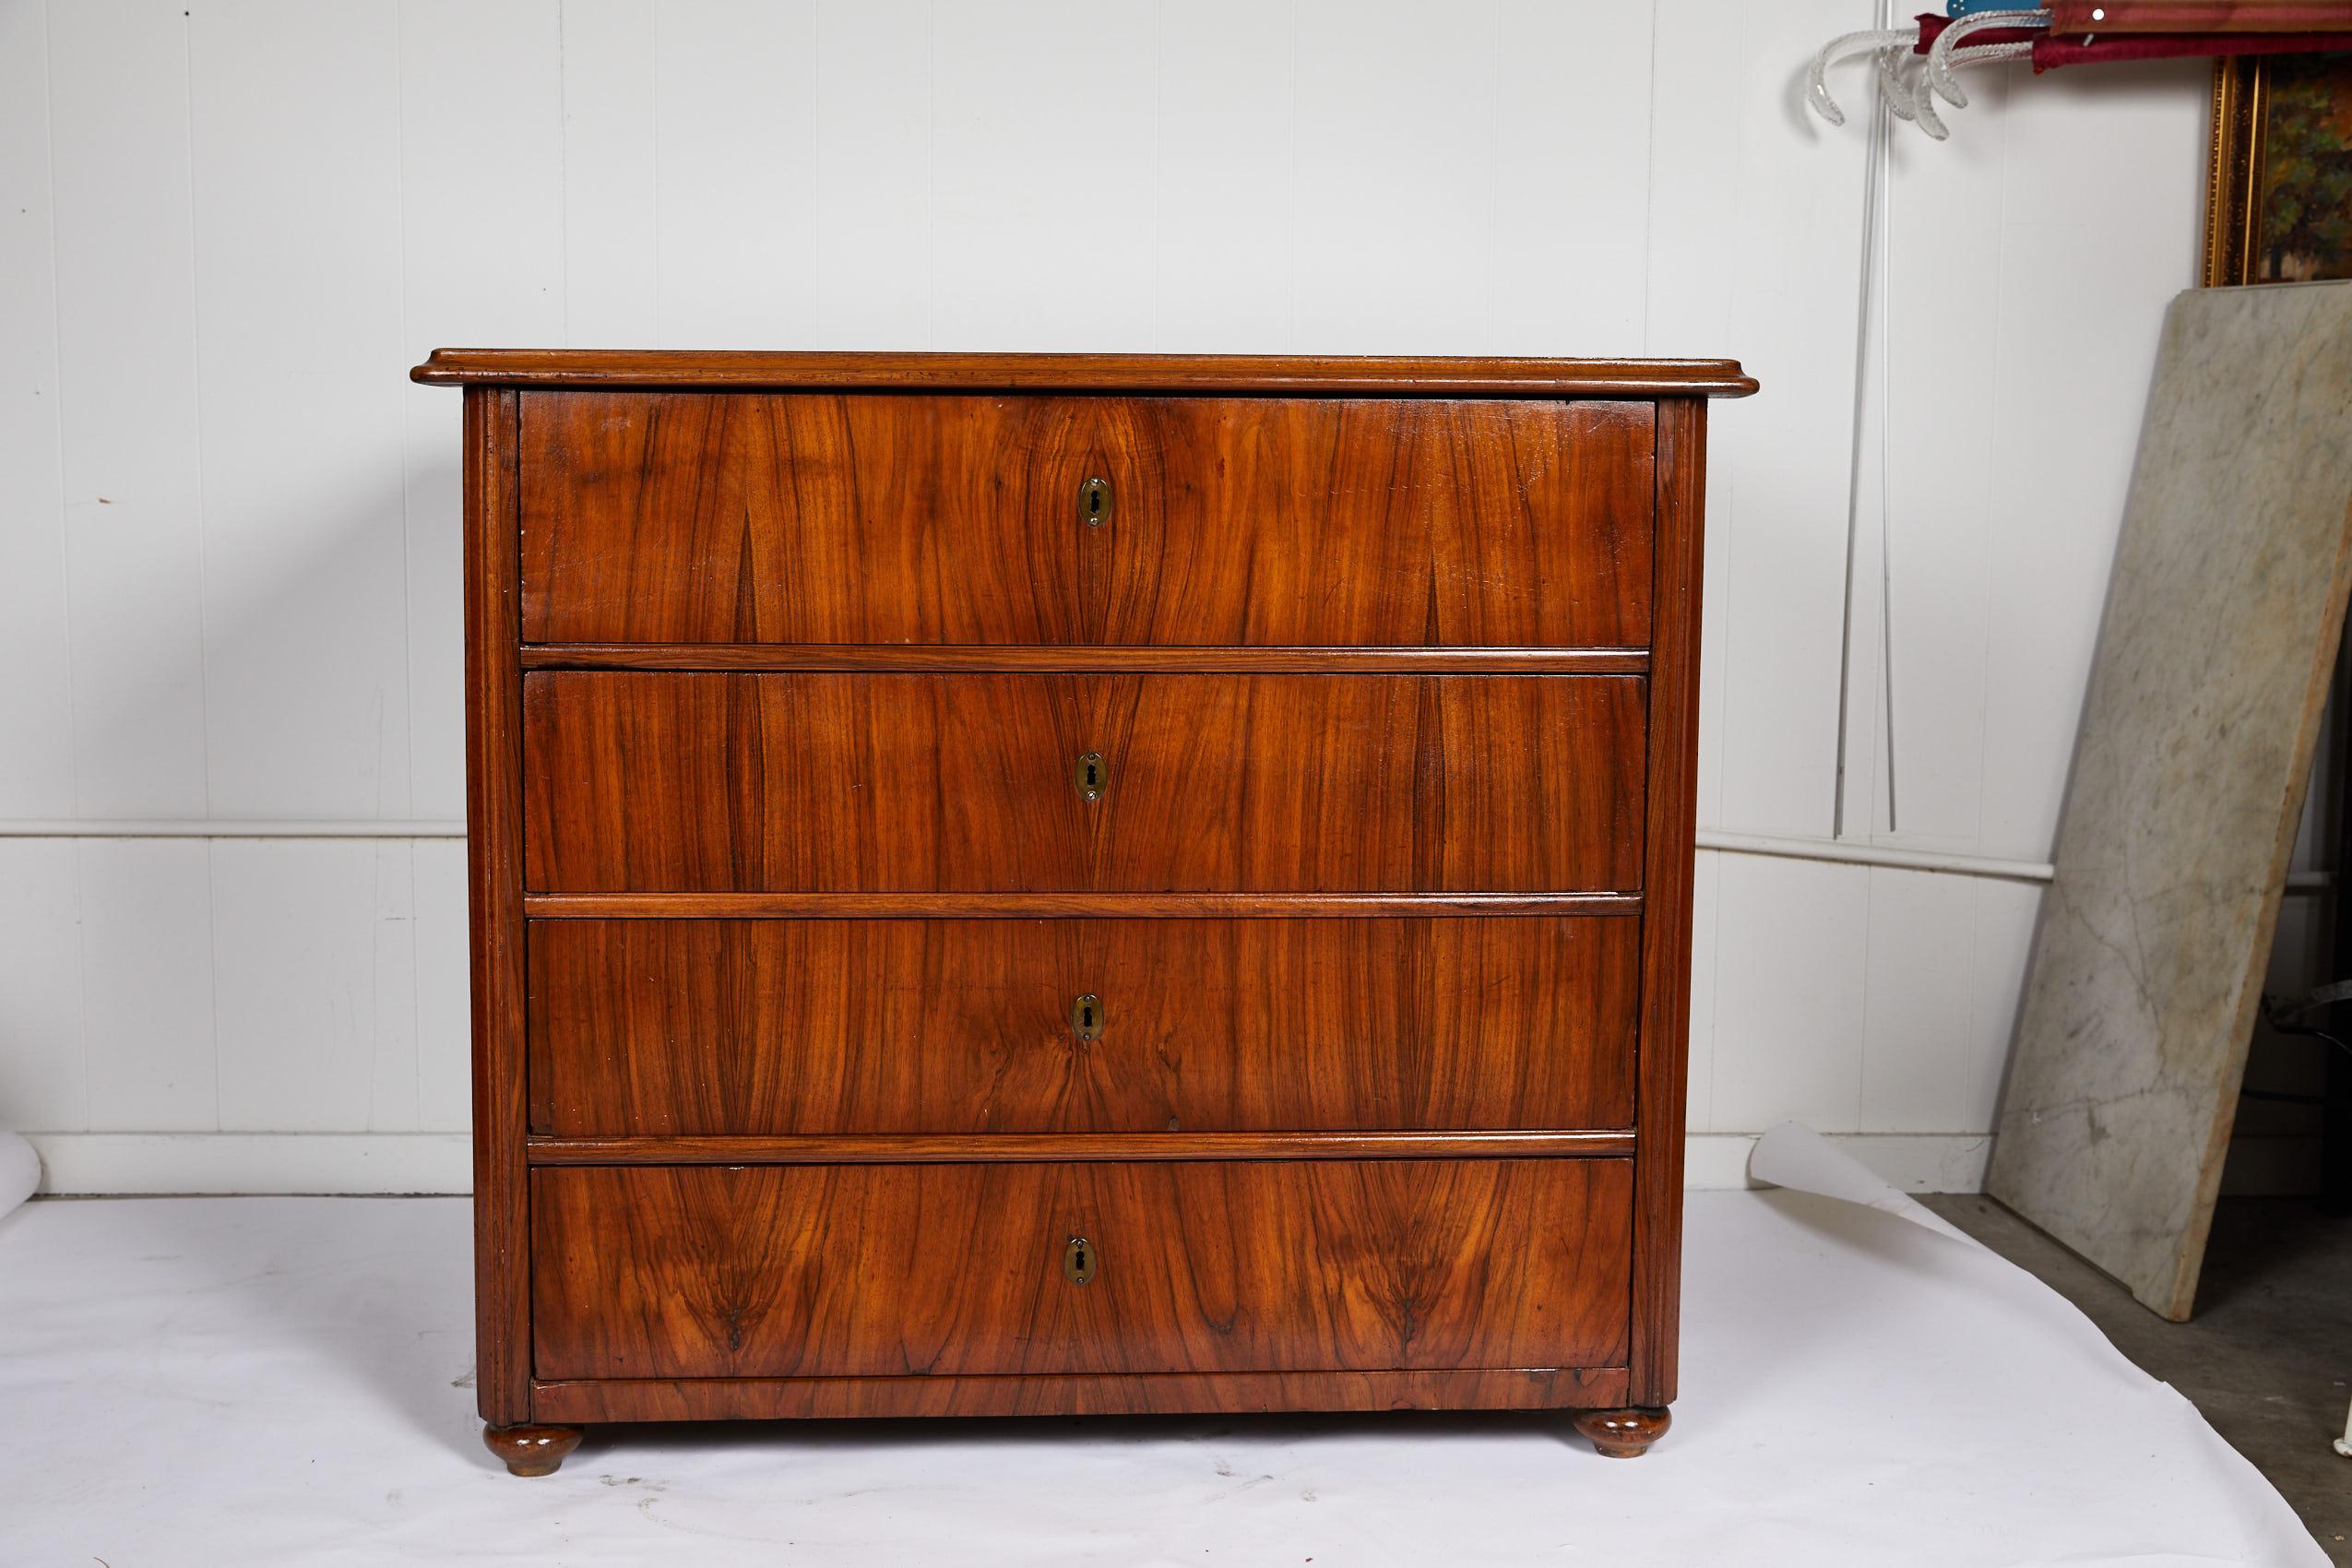 19th century large scaled and sleek Continental Biedermeier commode with a burl bookplate rosewood veneer on three sides. The case has a rectangular one board top and holds four deep drawers with oval brass escutcheons. The commode rests on bun feet.